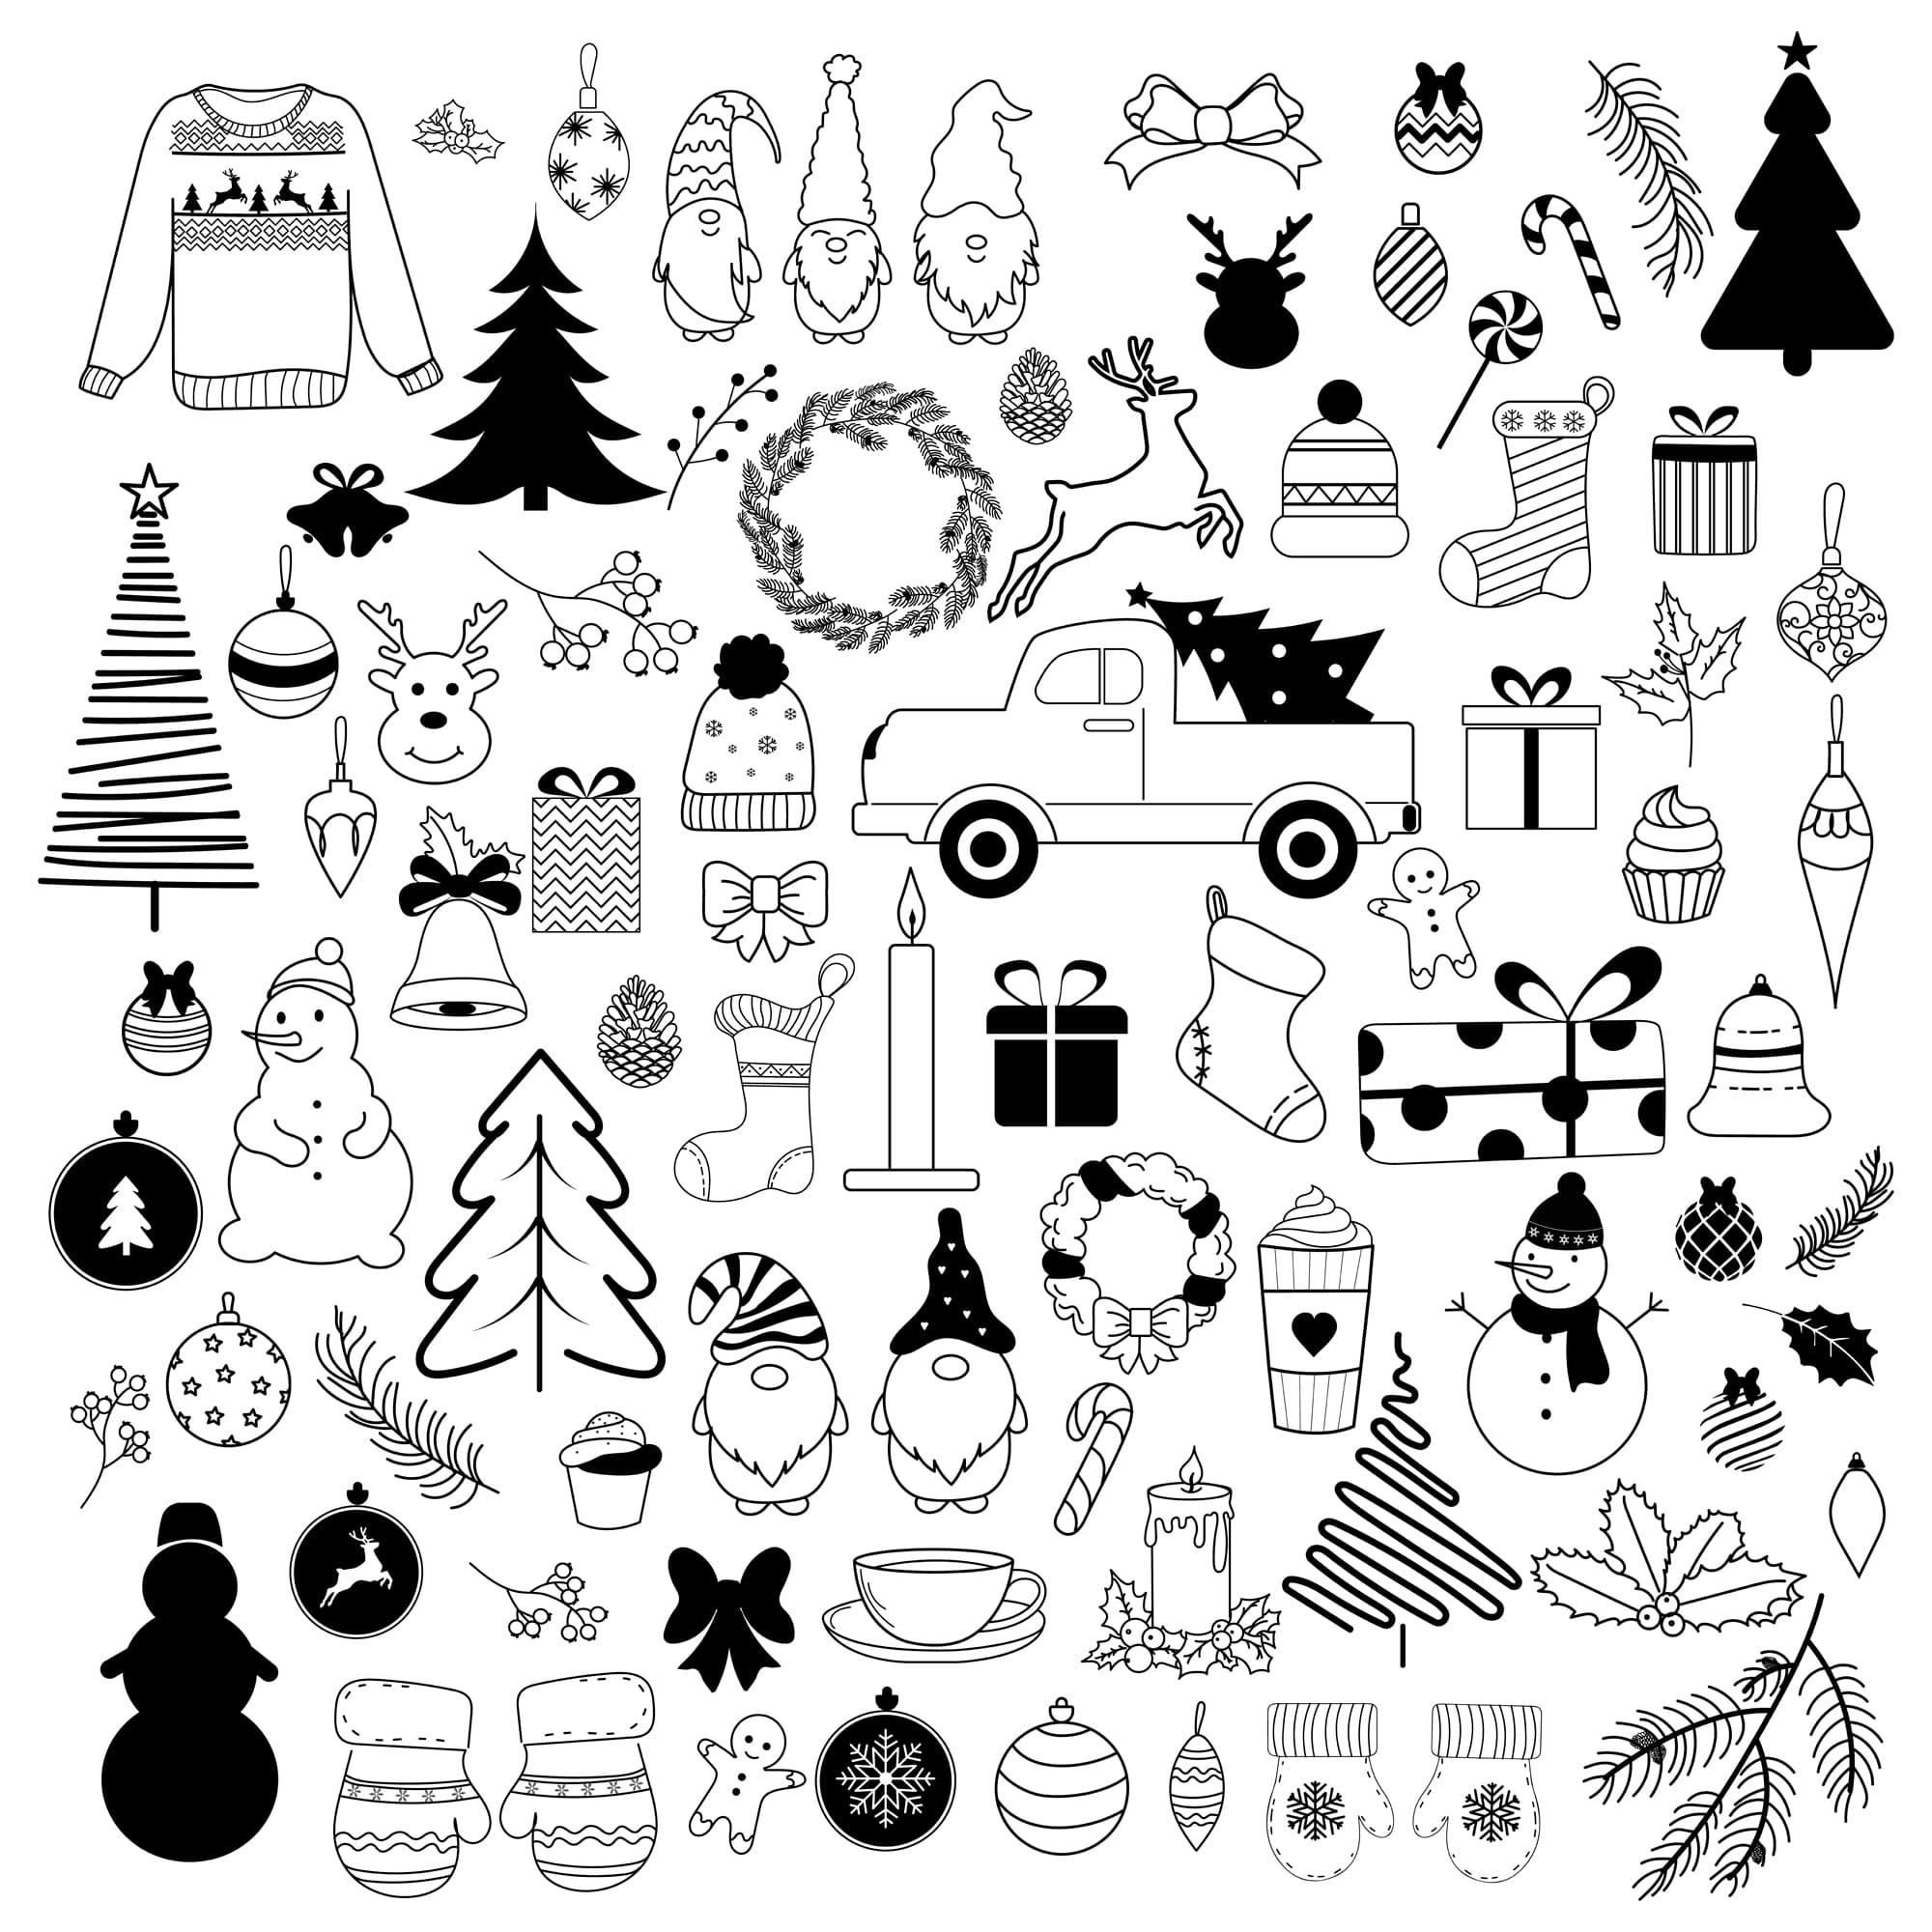 Christmas elements in outlined style.